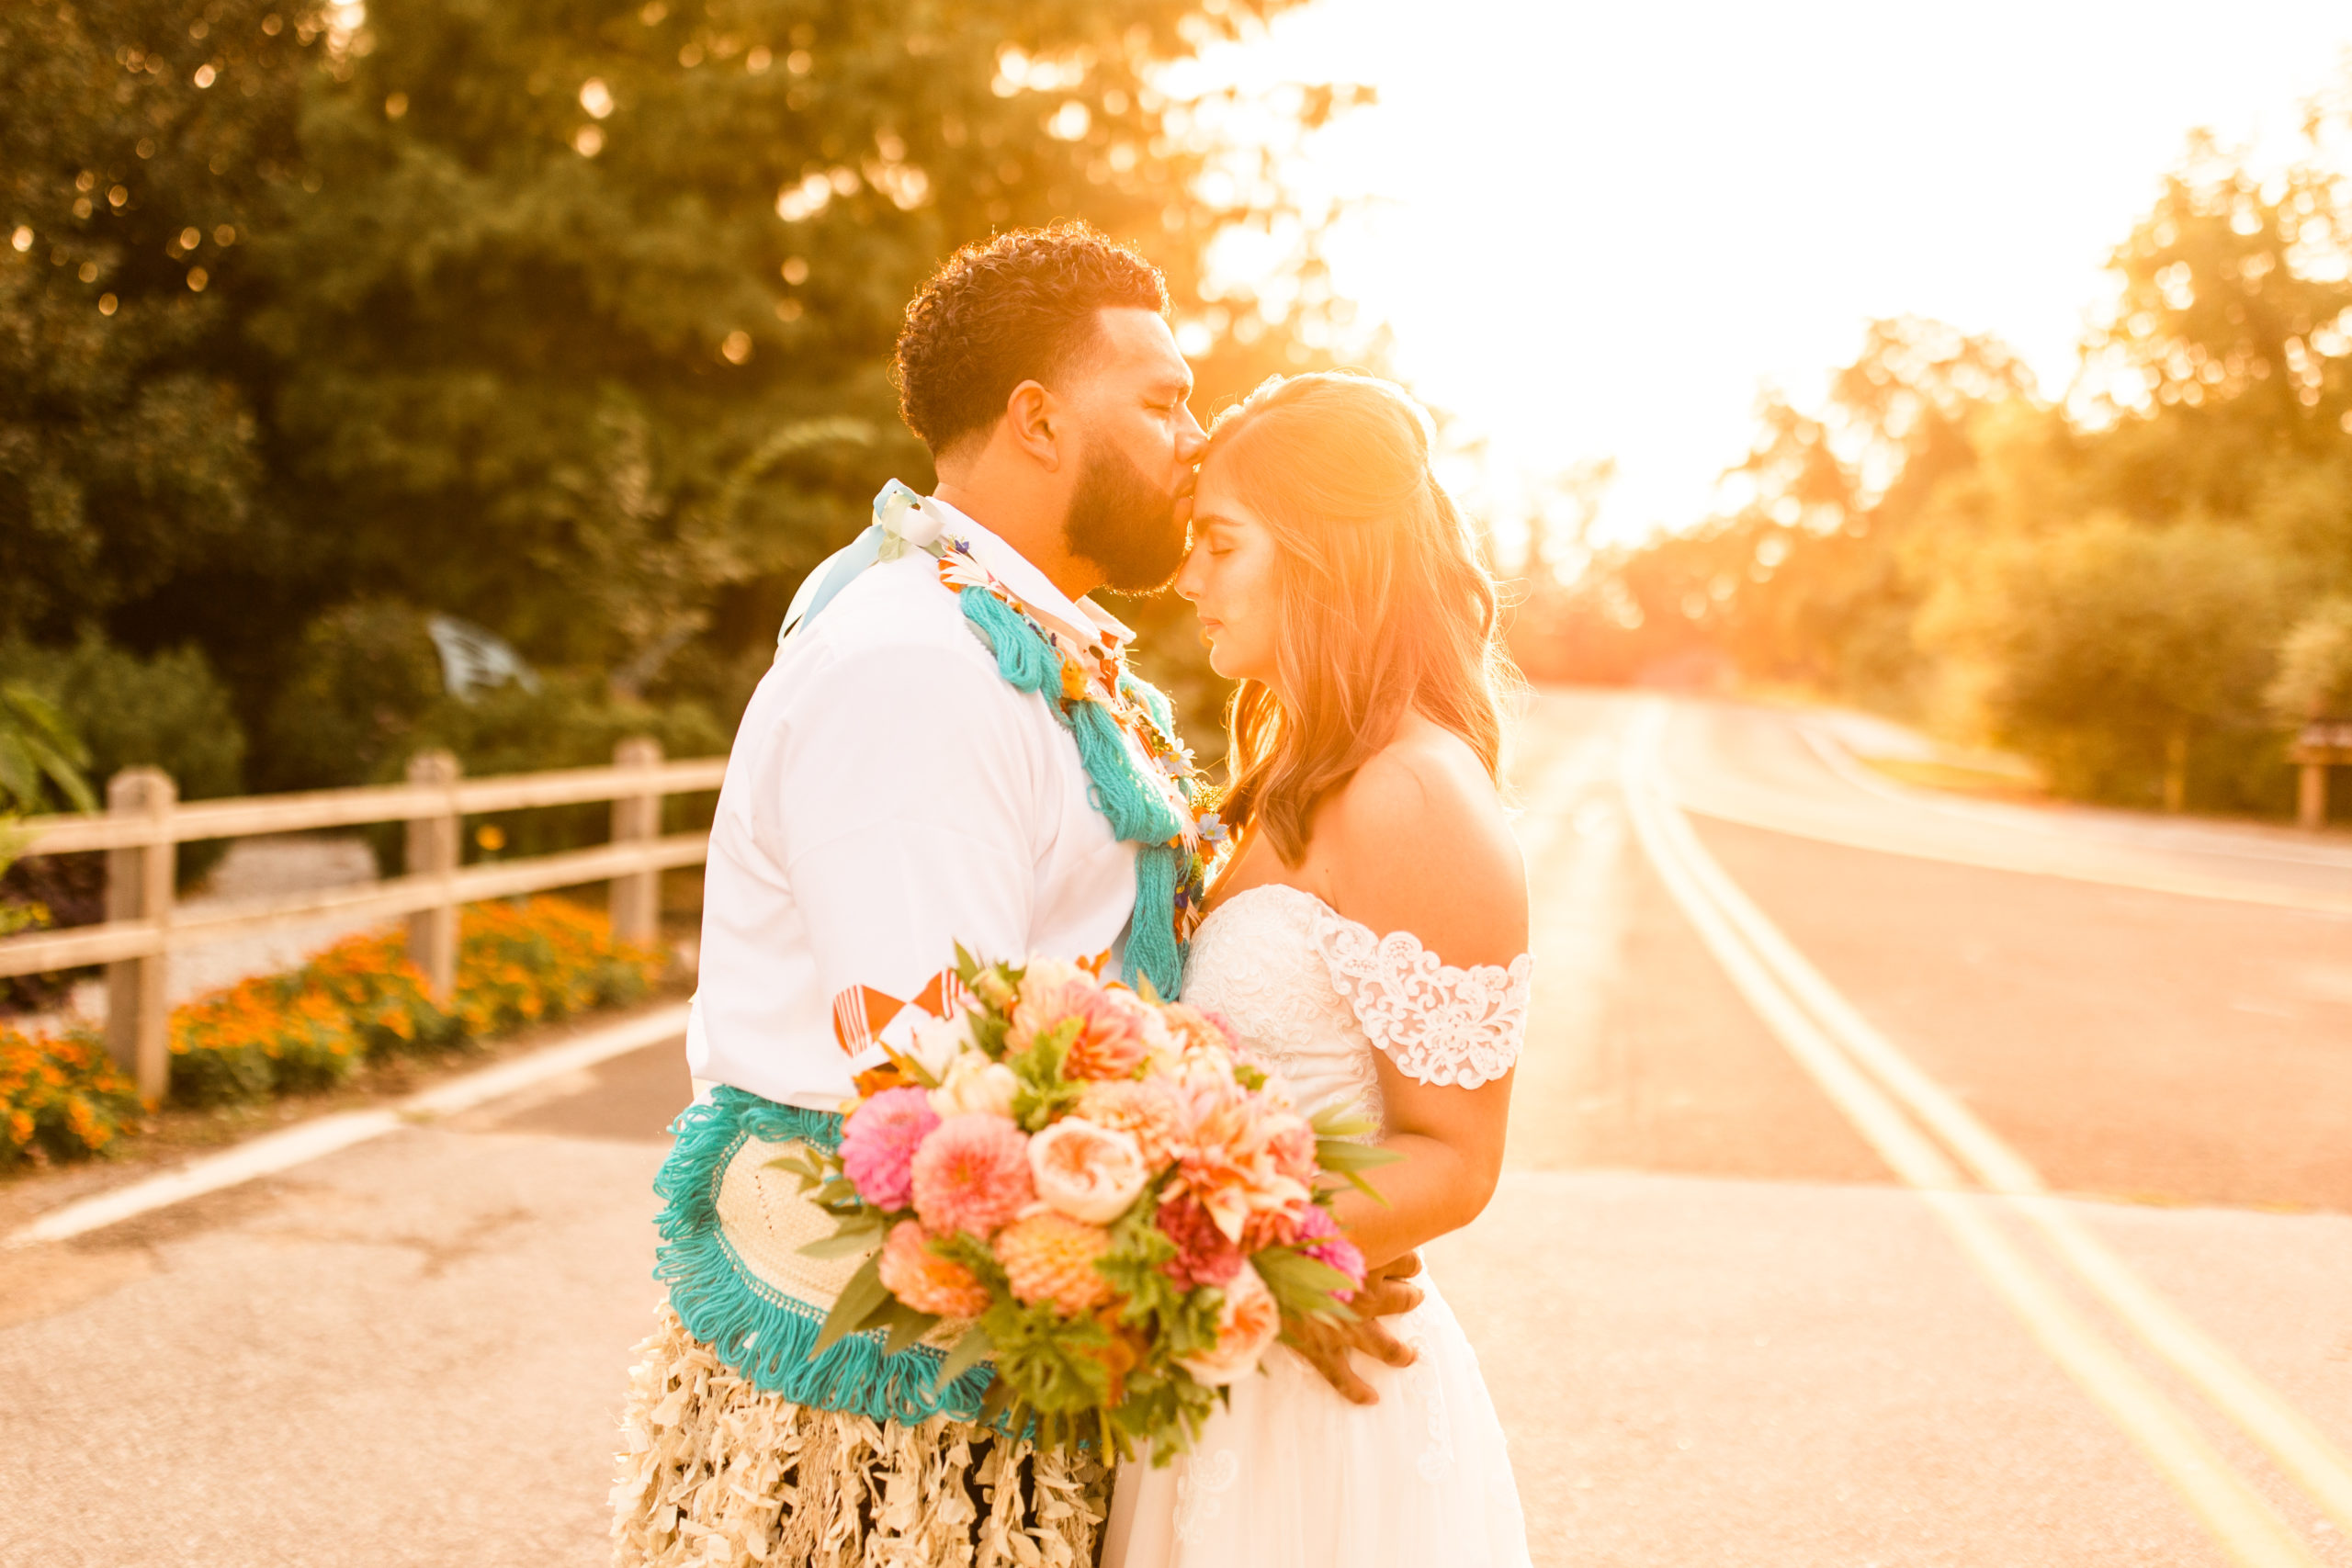 Portrait of a bride and groom dressed in traditional Pacific Islander wedding clothing